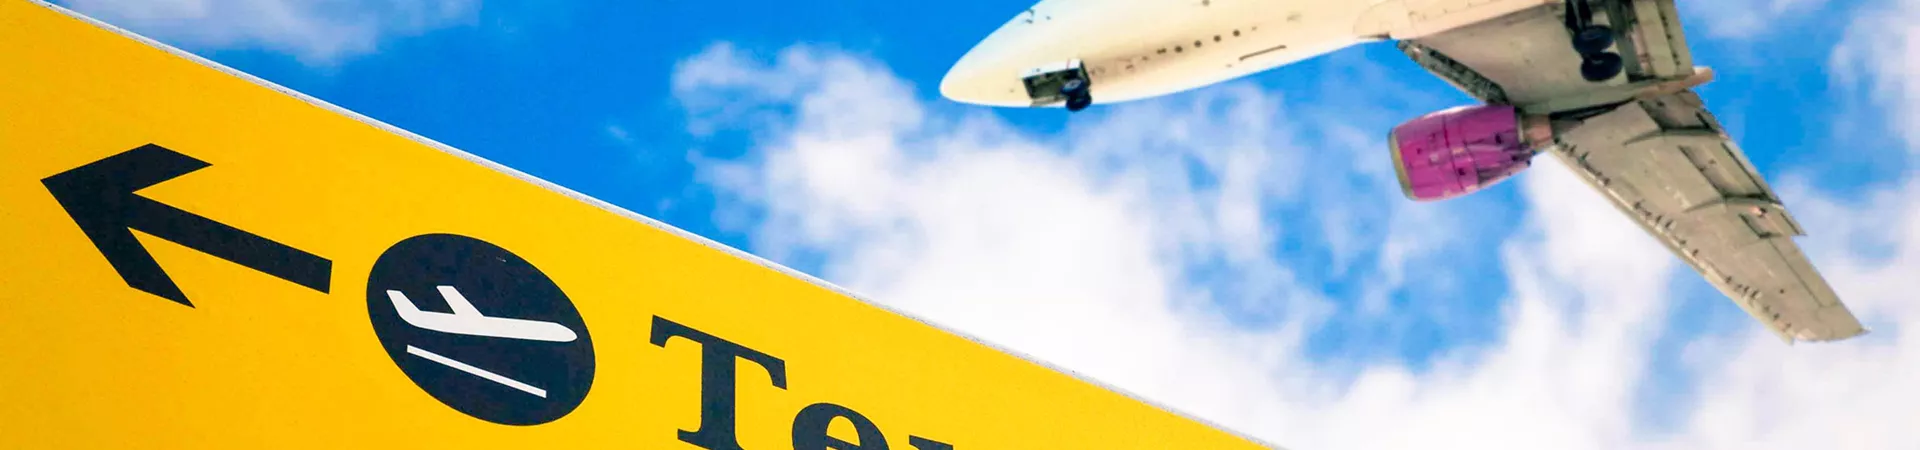 Airplane Flying Over Airport Sign Blue Sky